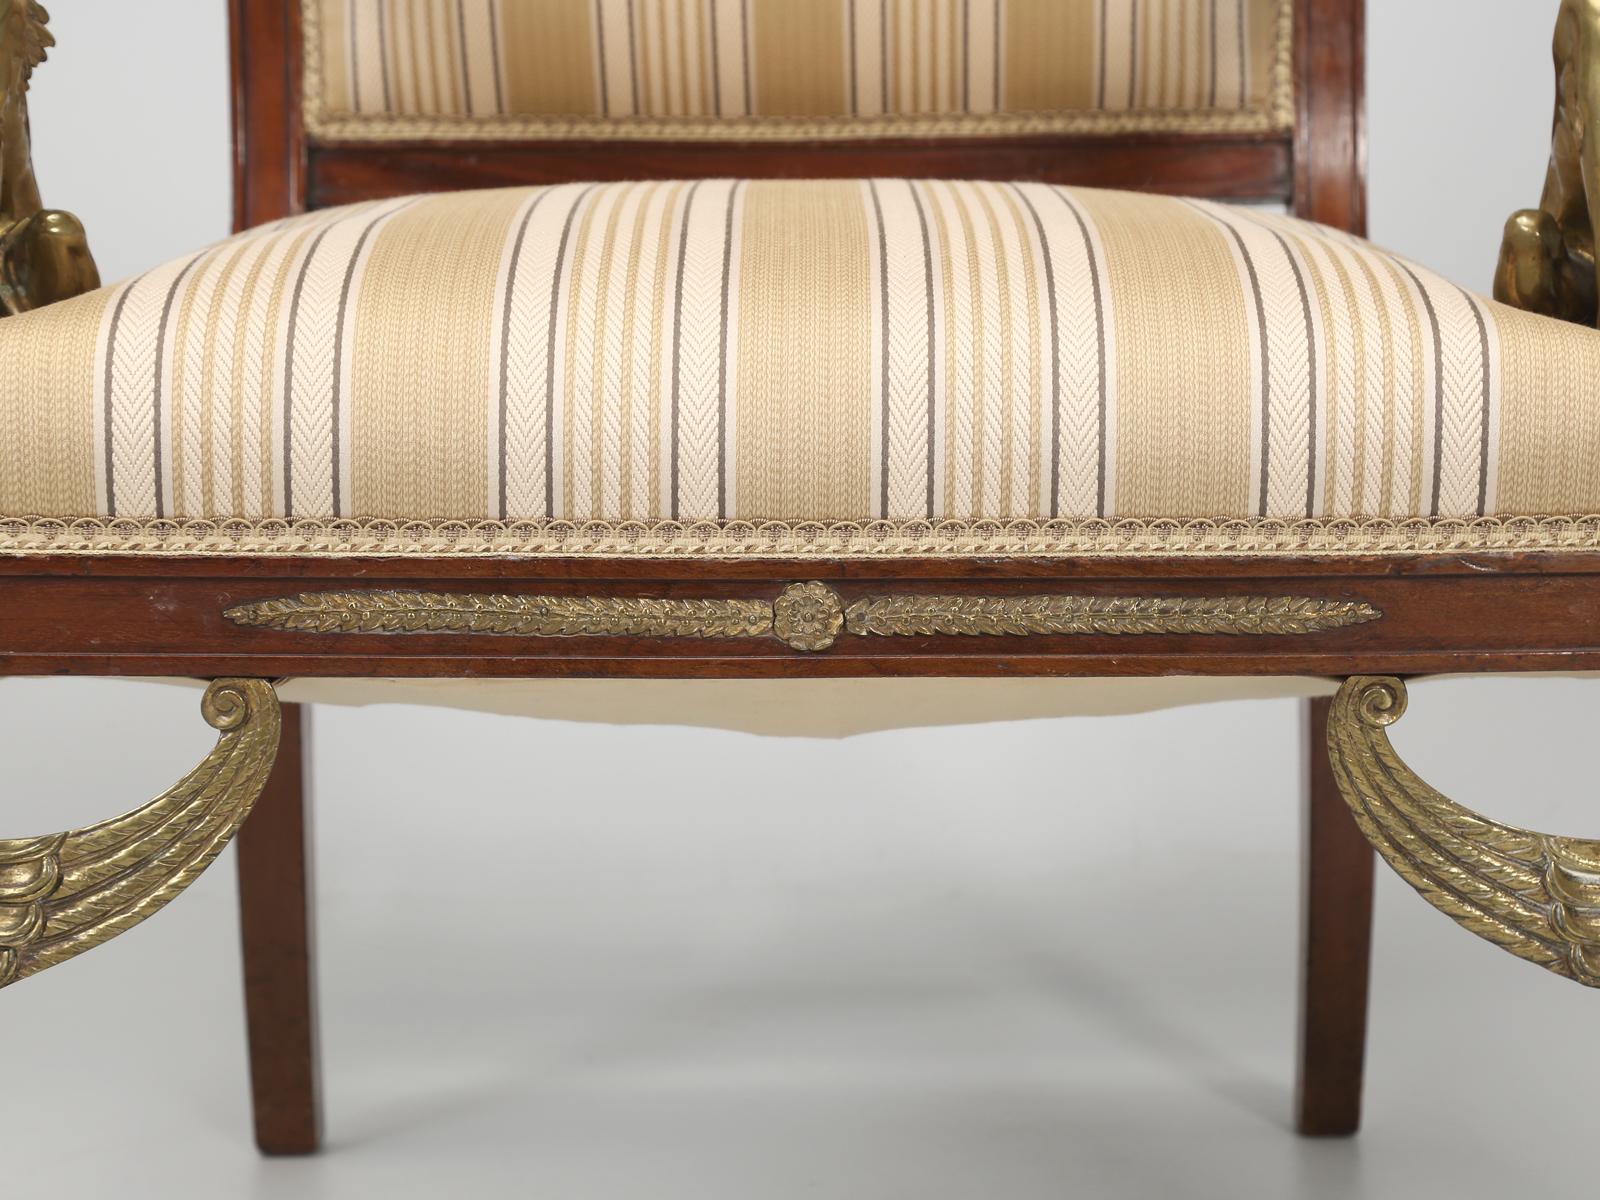 Antique French Empire Revival Arm Chairs Mahogany with Exceptional Quality c1840 For Sale 3